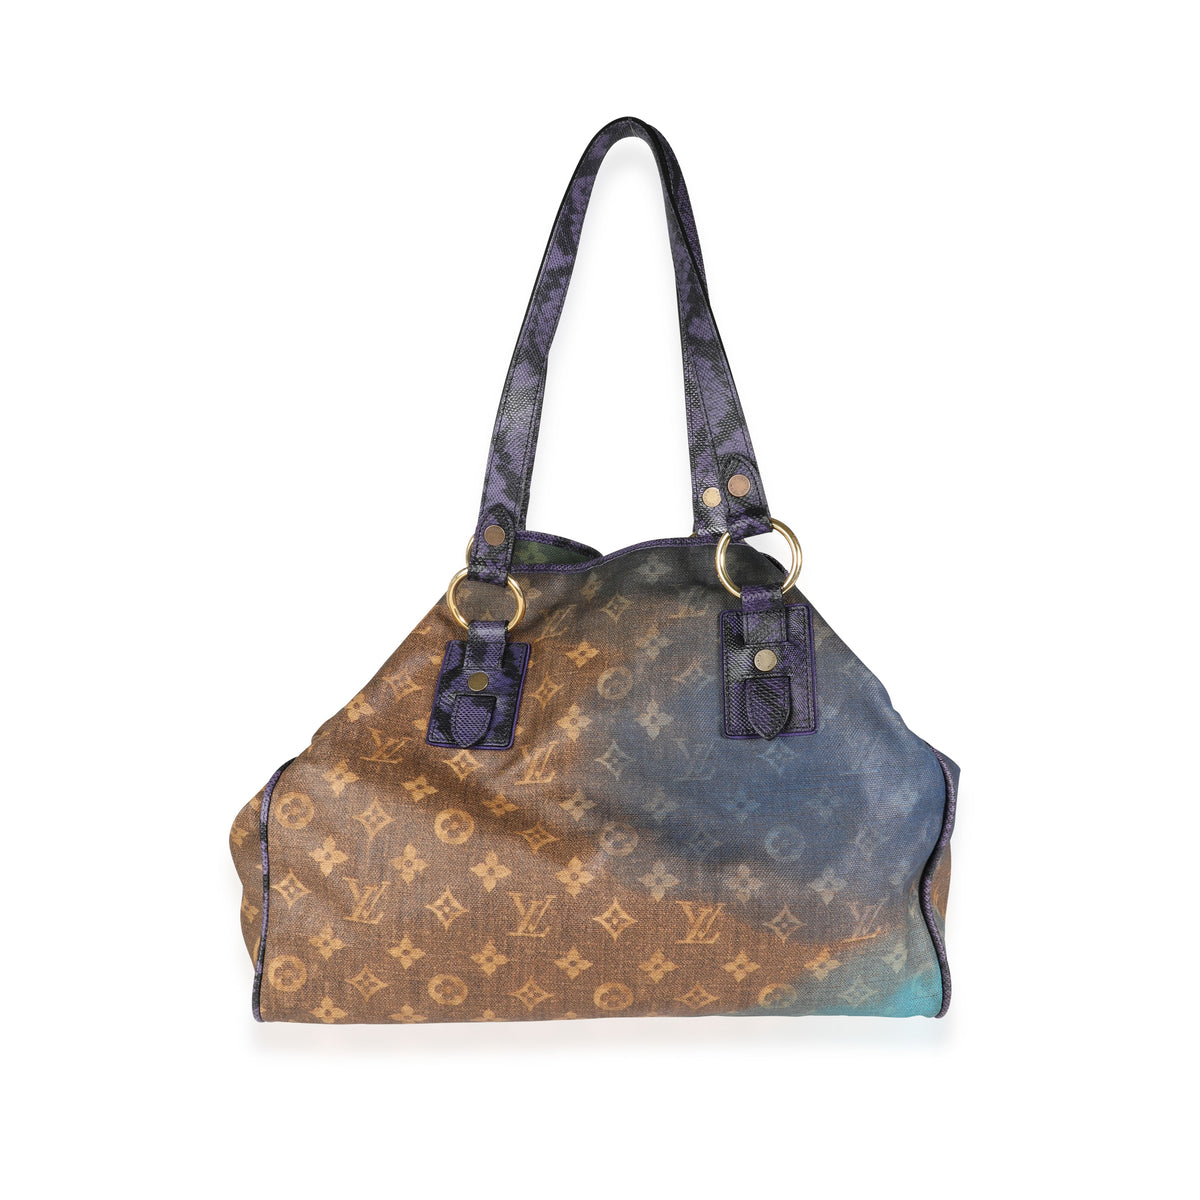 Uptown Cheapskate - Louis Vuitton monogram Richard Prince heartbreak jokes  tote. This unique limited edition bag features a streetwear style that is  one of a kind! Retail price $2,850. Our price $1,499.00.